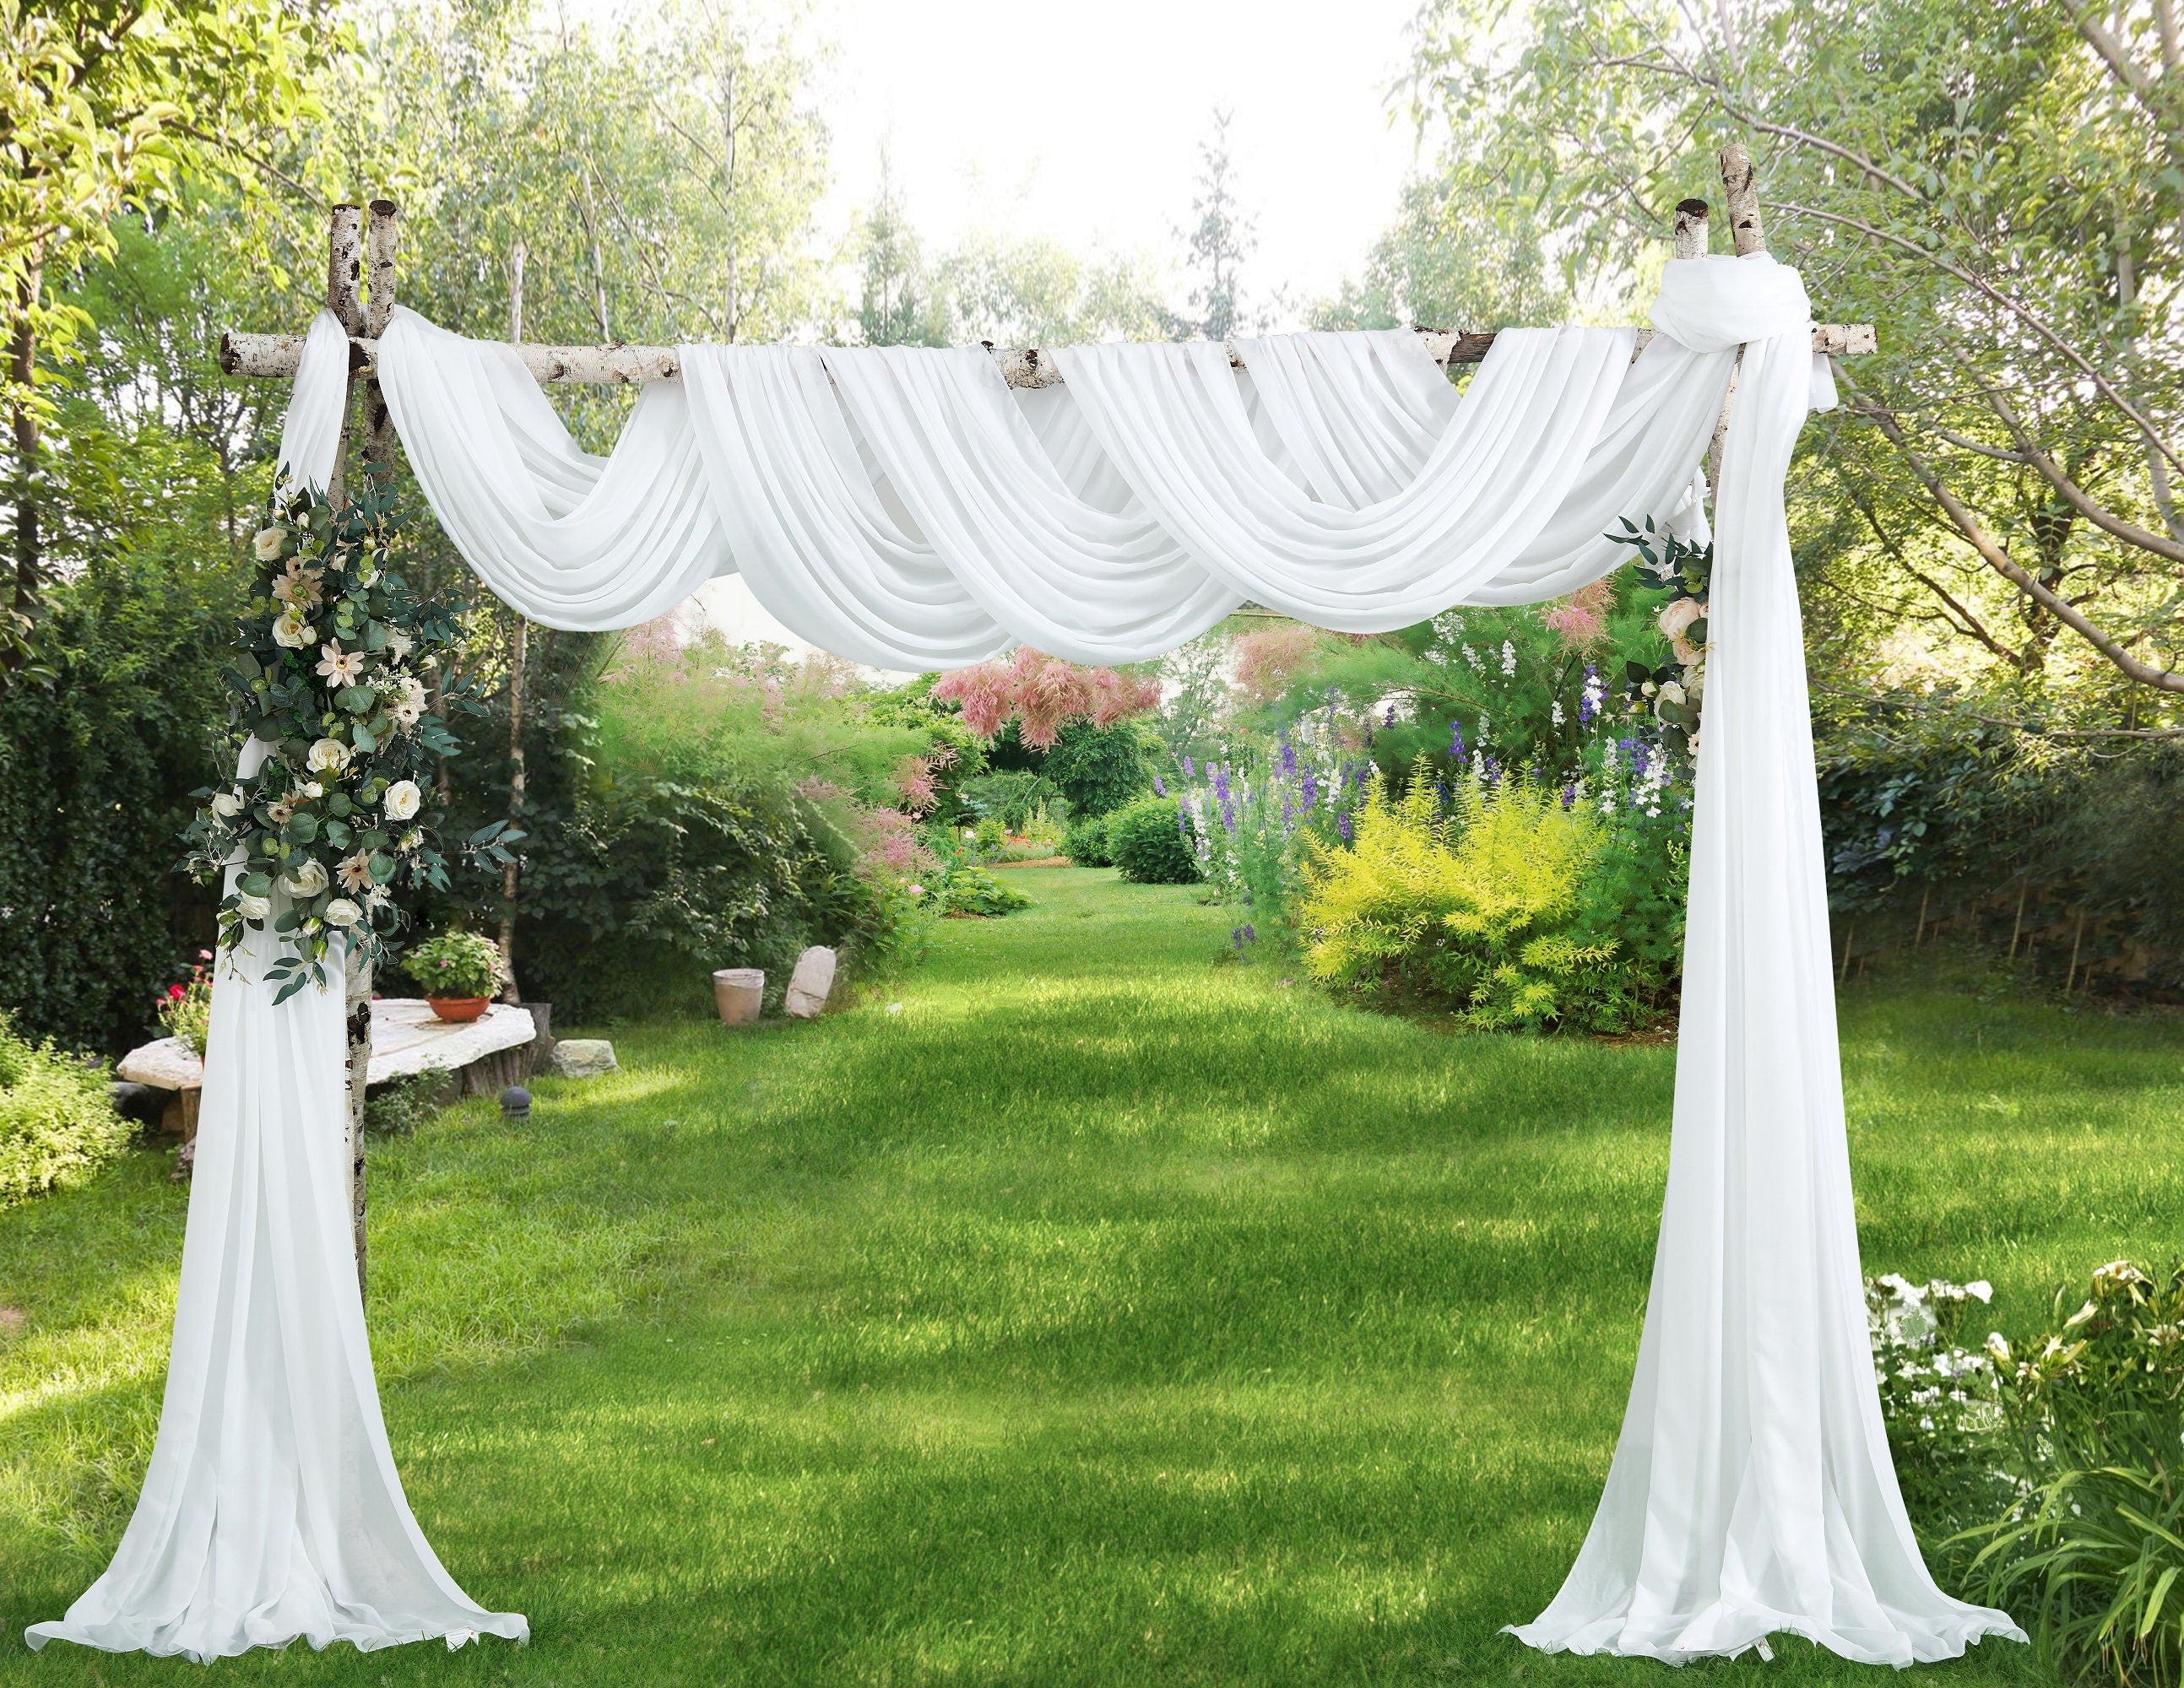 2 Chiffon Wedding Arch Draping Fabric Scarves in 18 or 24 Foot